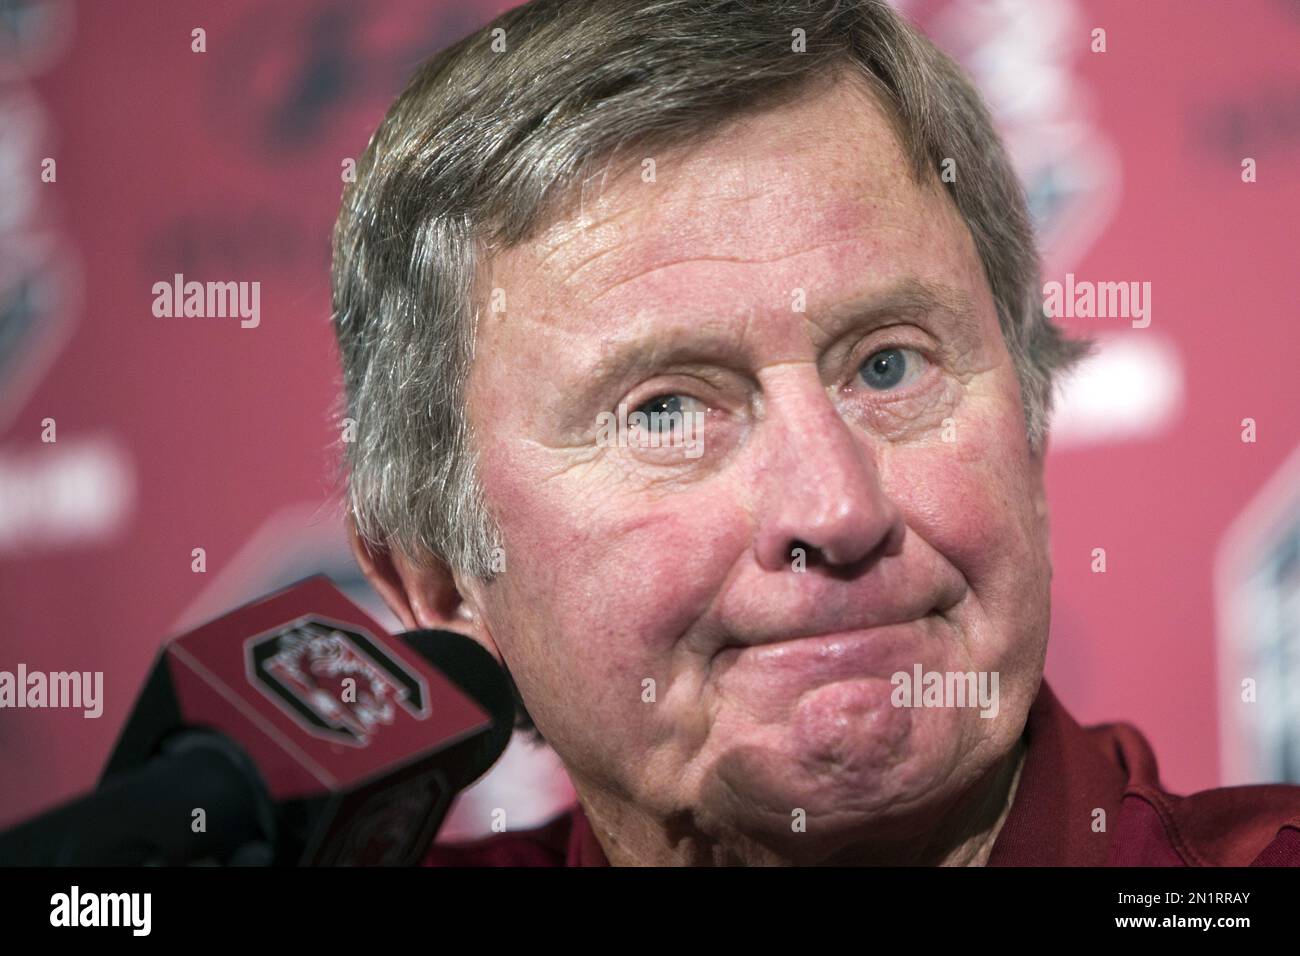 South Carolina head coach Steve Spurrier takes questions from reporters during NCAA college football media day in Columbia, S.C., Sunday, Aug. 9, 2015. (AP Photo/Stephen B. Morton) Stock Photo